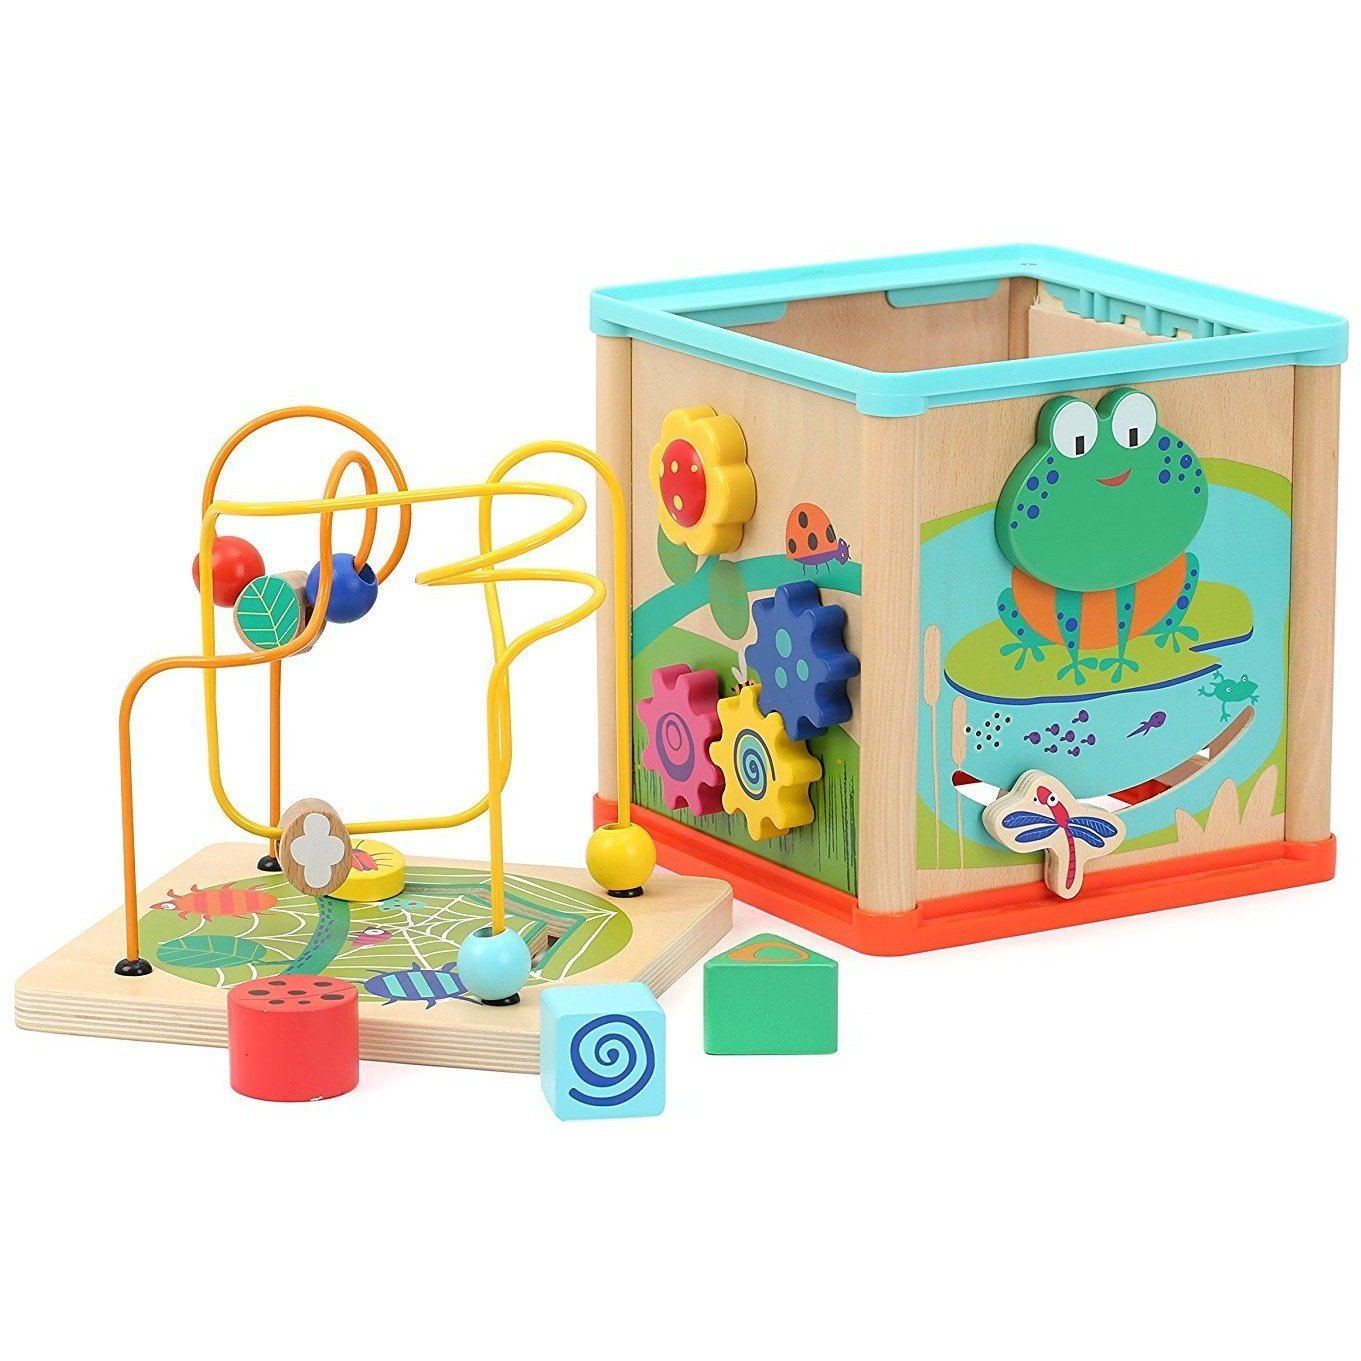 Small Foot Activity Cube with Multifunctional Playing Fun on Five Sides (de madeira) Anne Claire Baby Store 